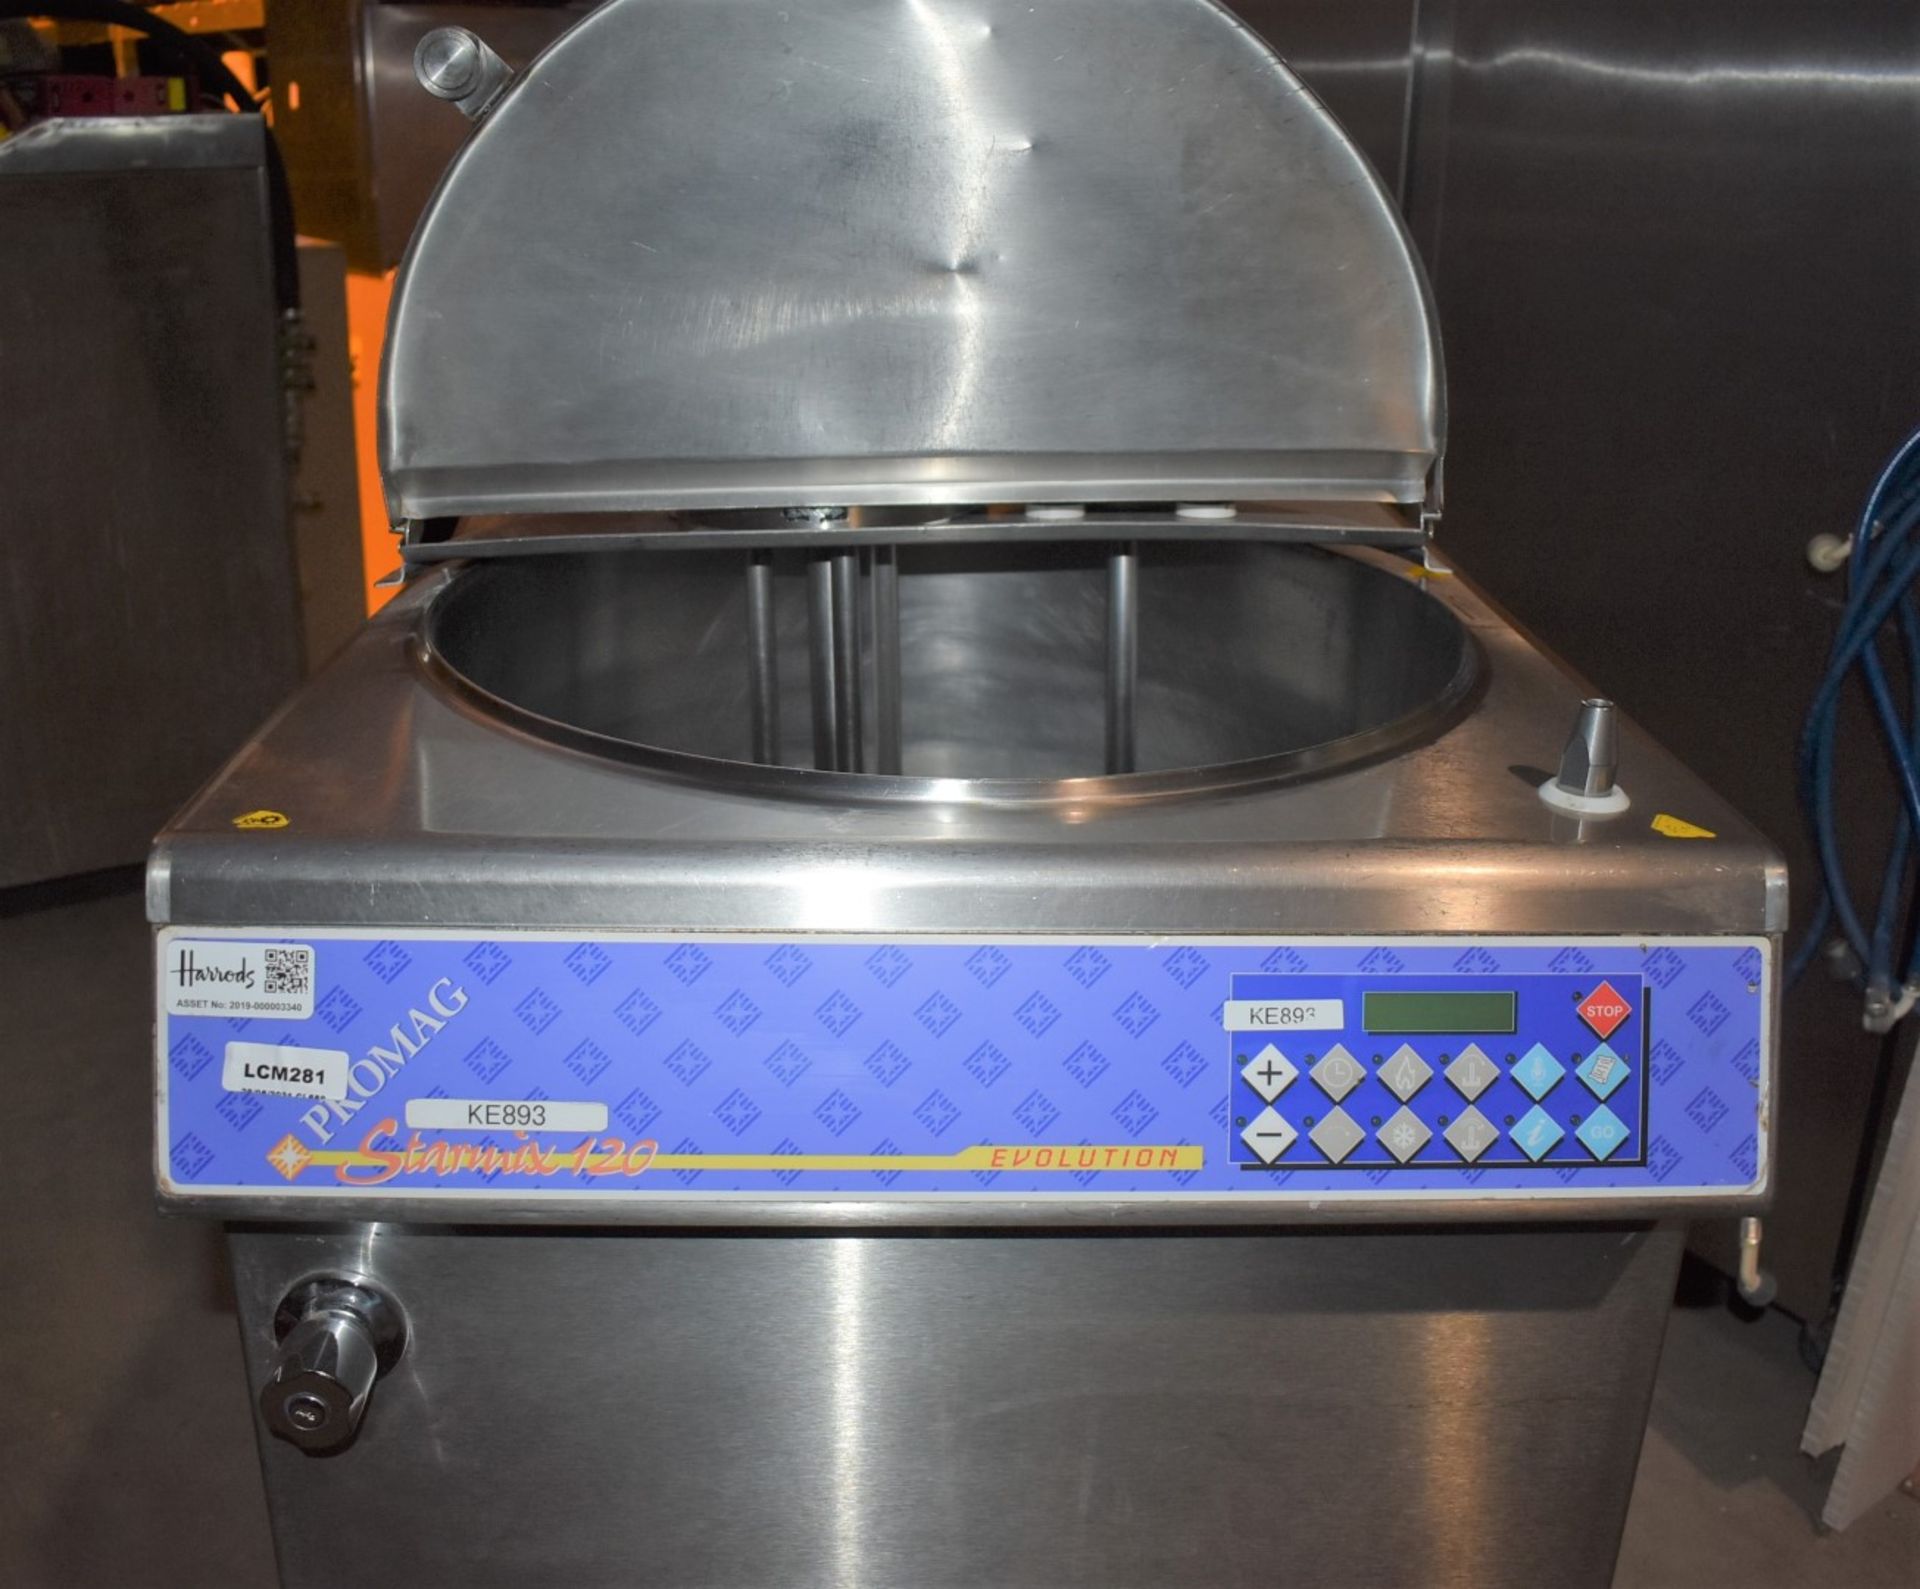 1 x Promag Starmix 120 Ice Cream Batch Pasteuriser - CL987 - Made in Italy - 3 Phase - Ref LCM281 - Image 17 of 17